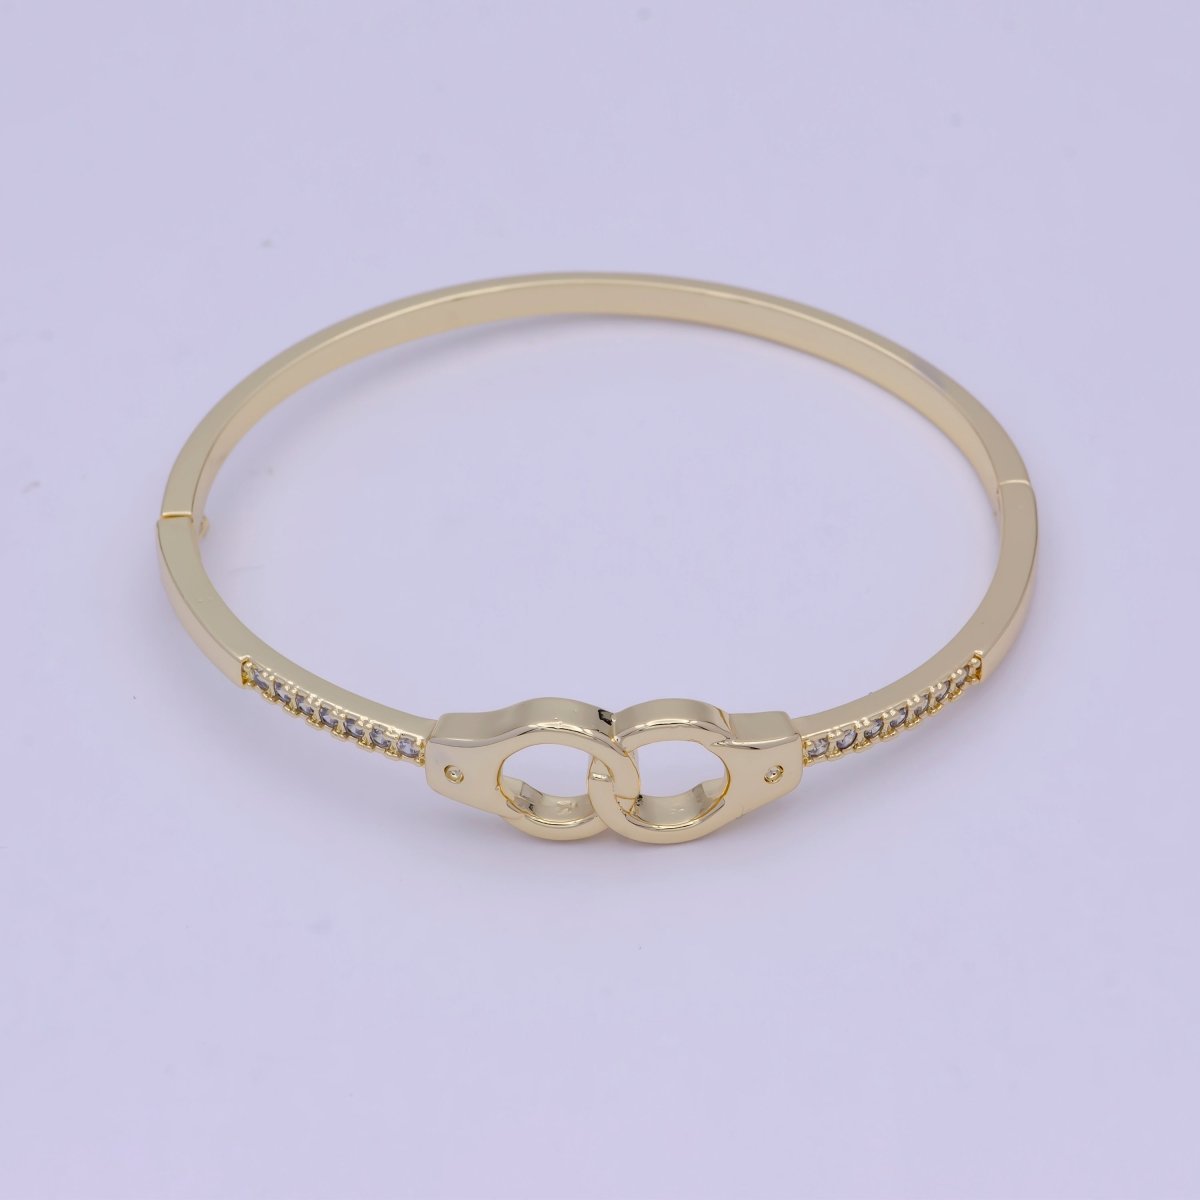 24k Gold Filled Handcuff Bracelet Hand Cuff Bangle Dazzling Stackable Bracelet | WA-1022 Clearance Pricing - DLUXCA